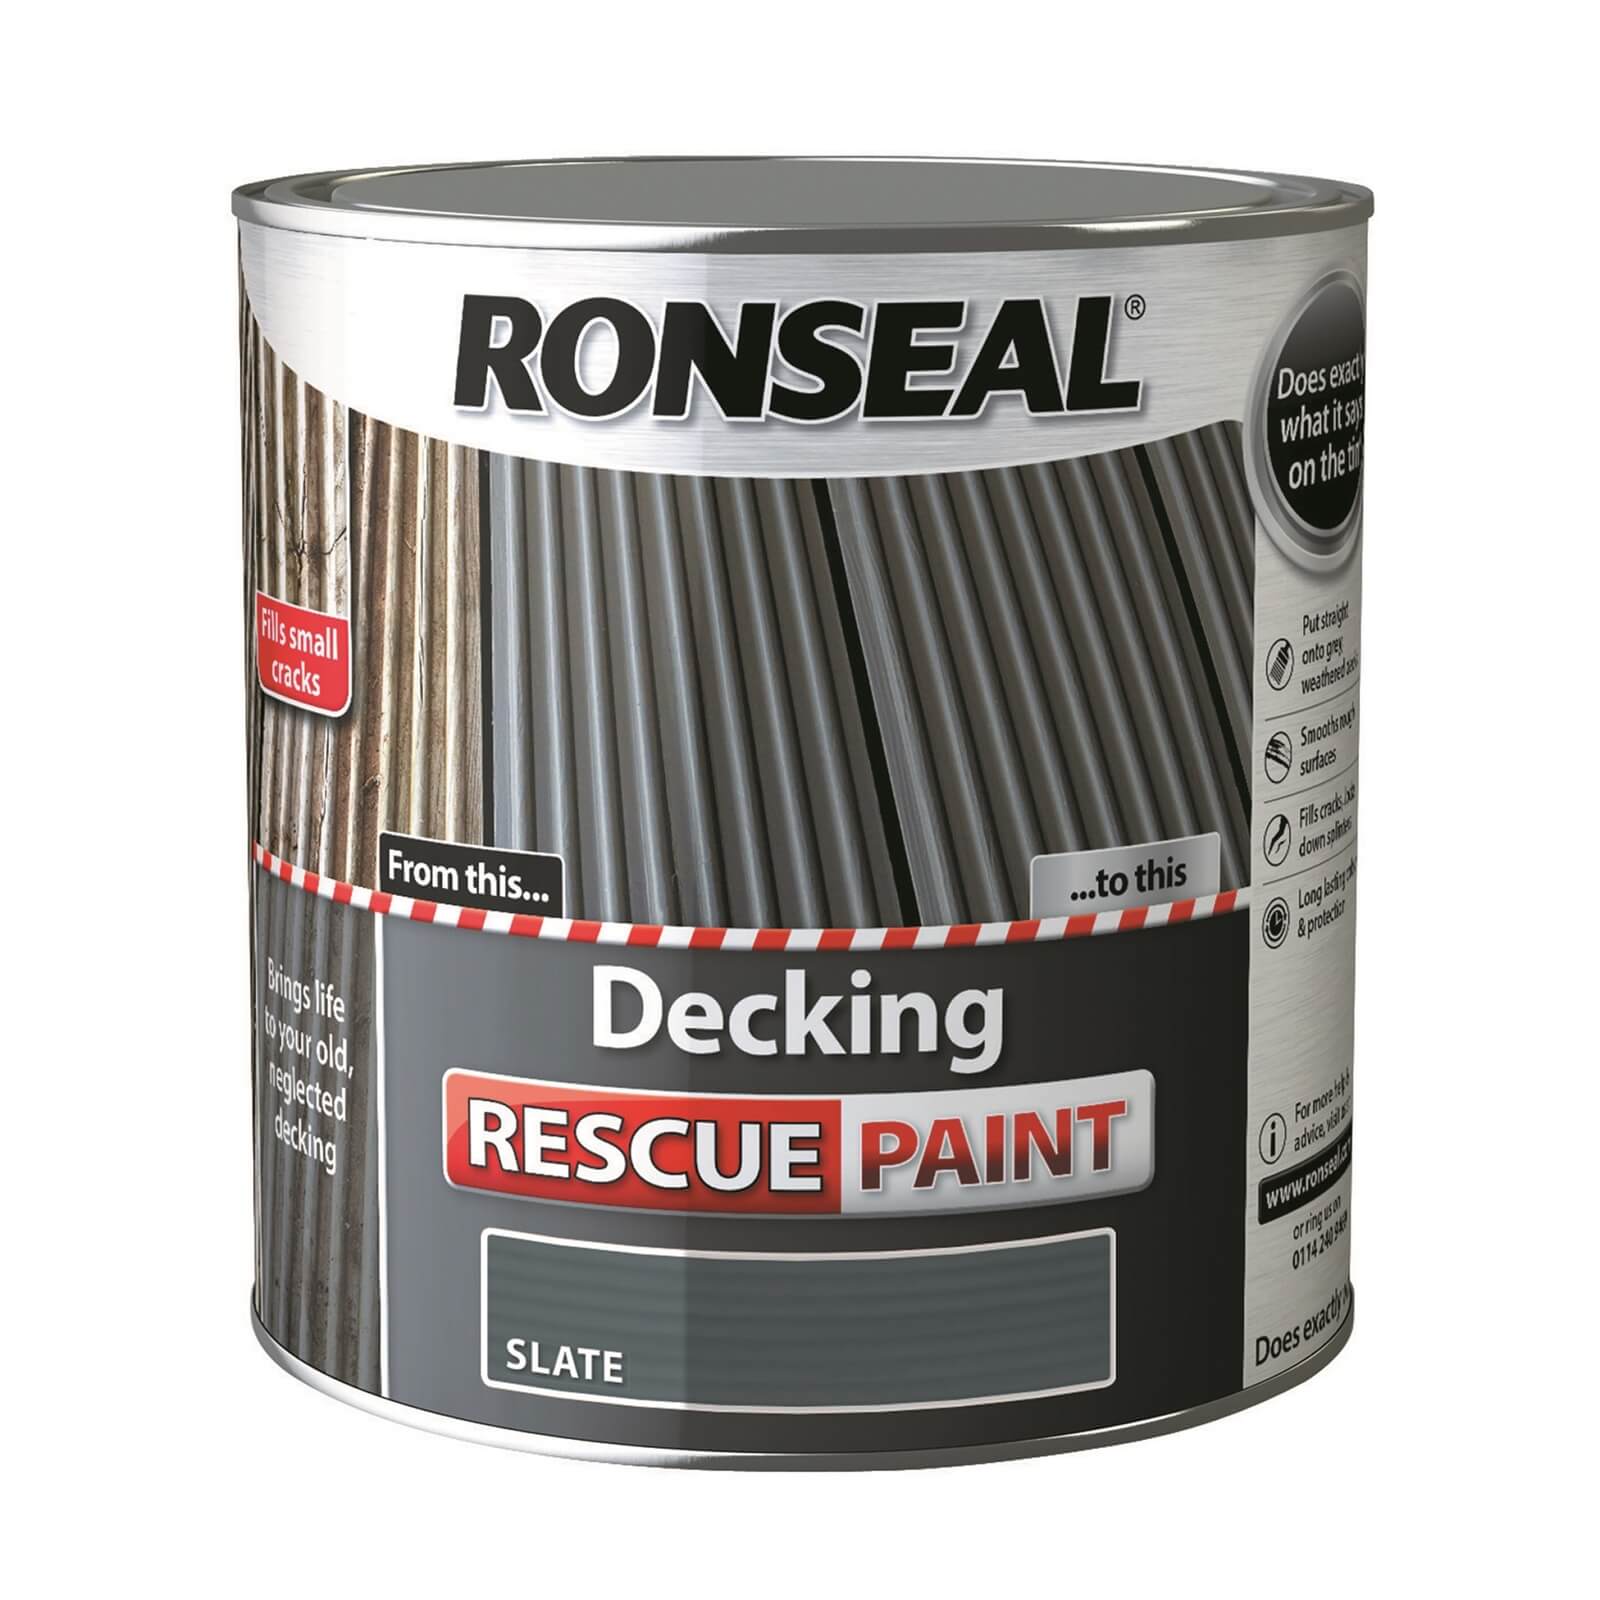 Ronseal Decking Rescue Paint Slate - 2.5L